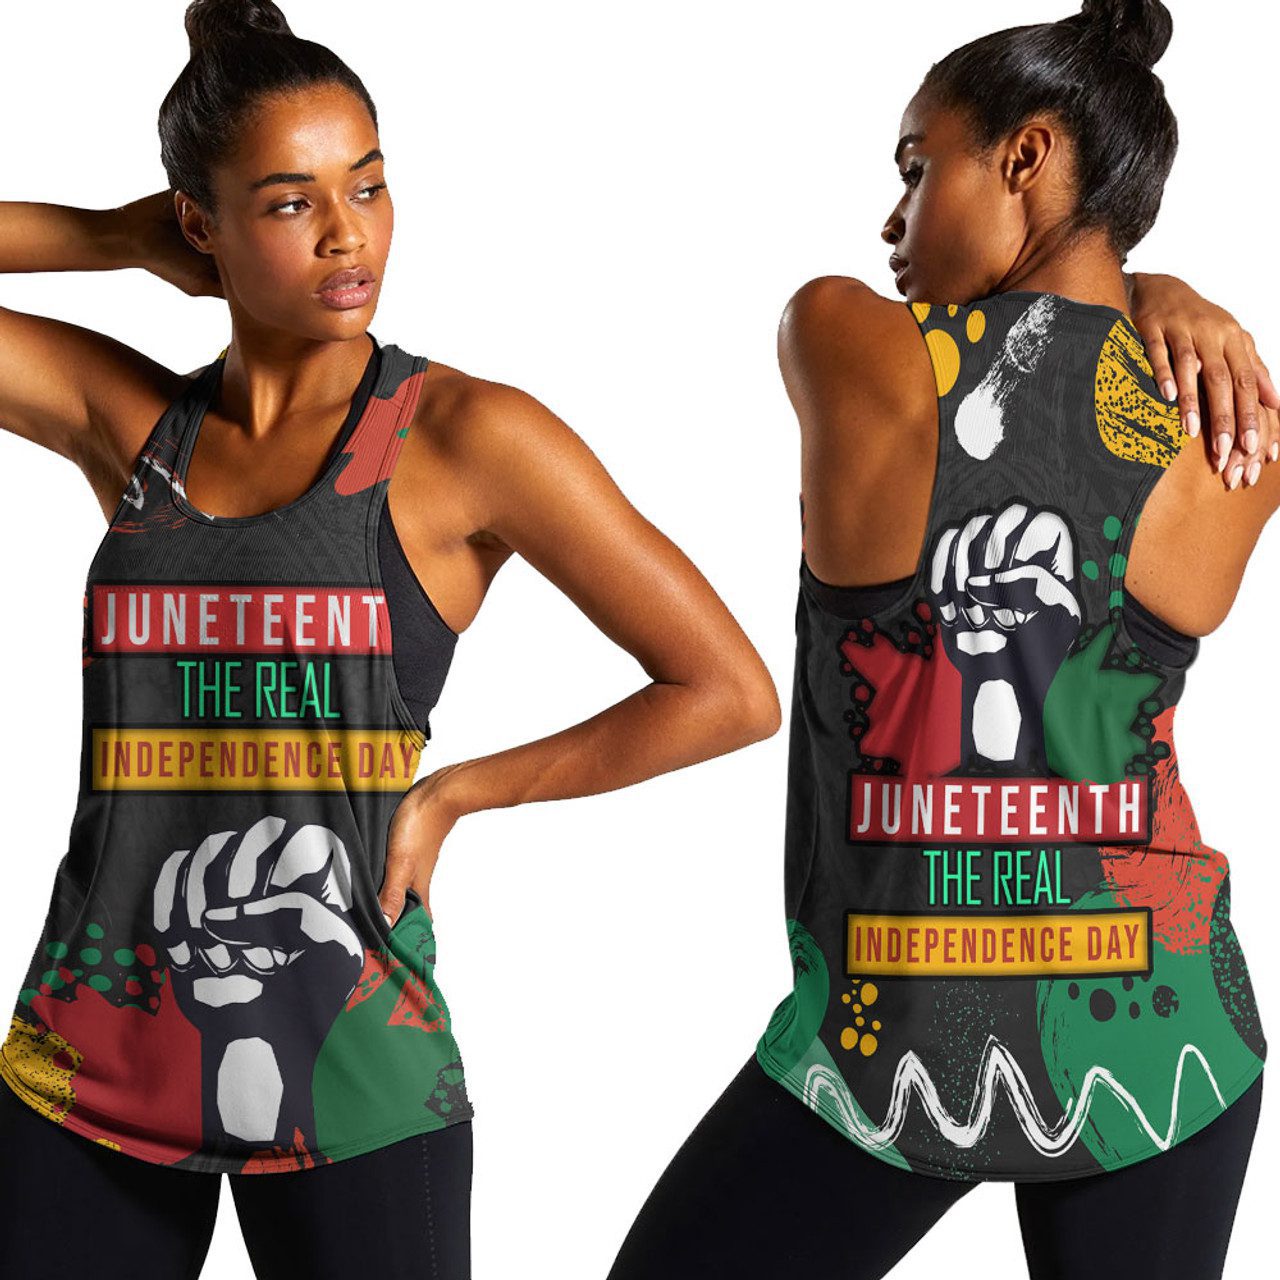 Juneteenth The Real Independence Day Women Racerback Tanks